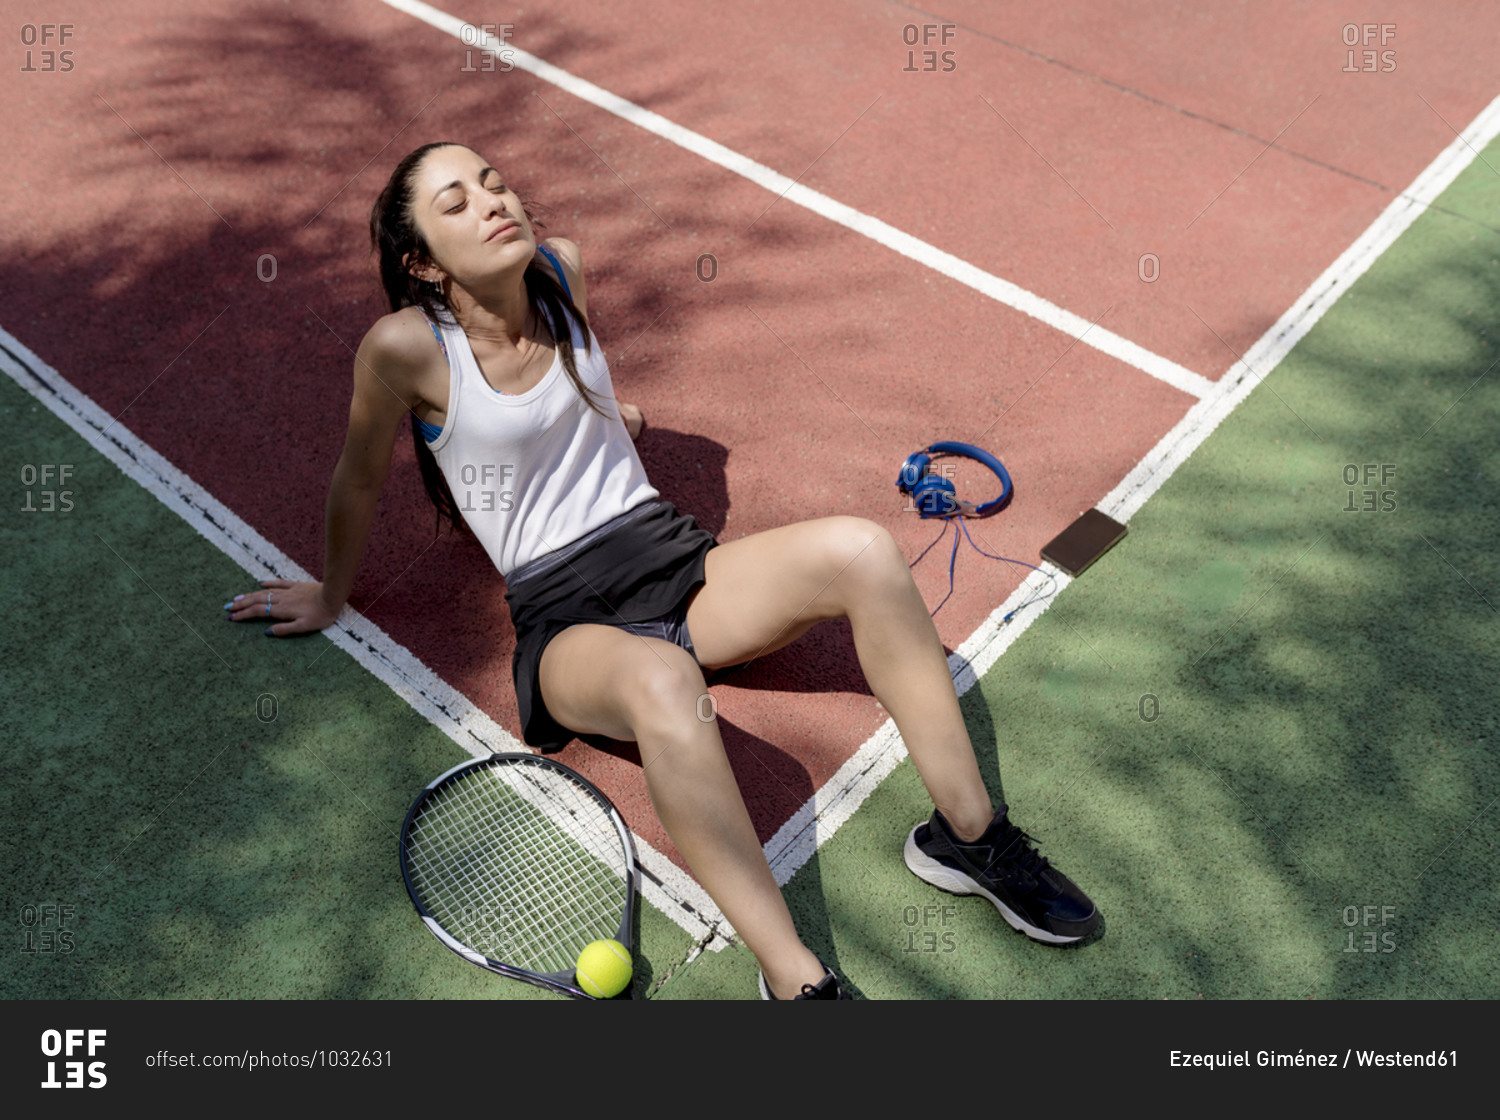 Female tennis player with eyes closed relaxing on floor in sports court